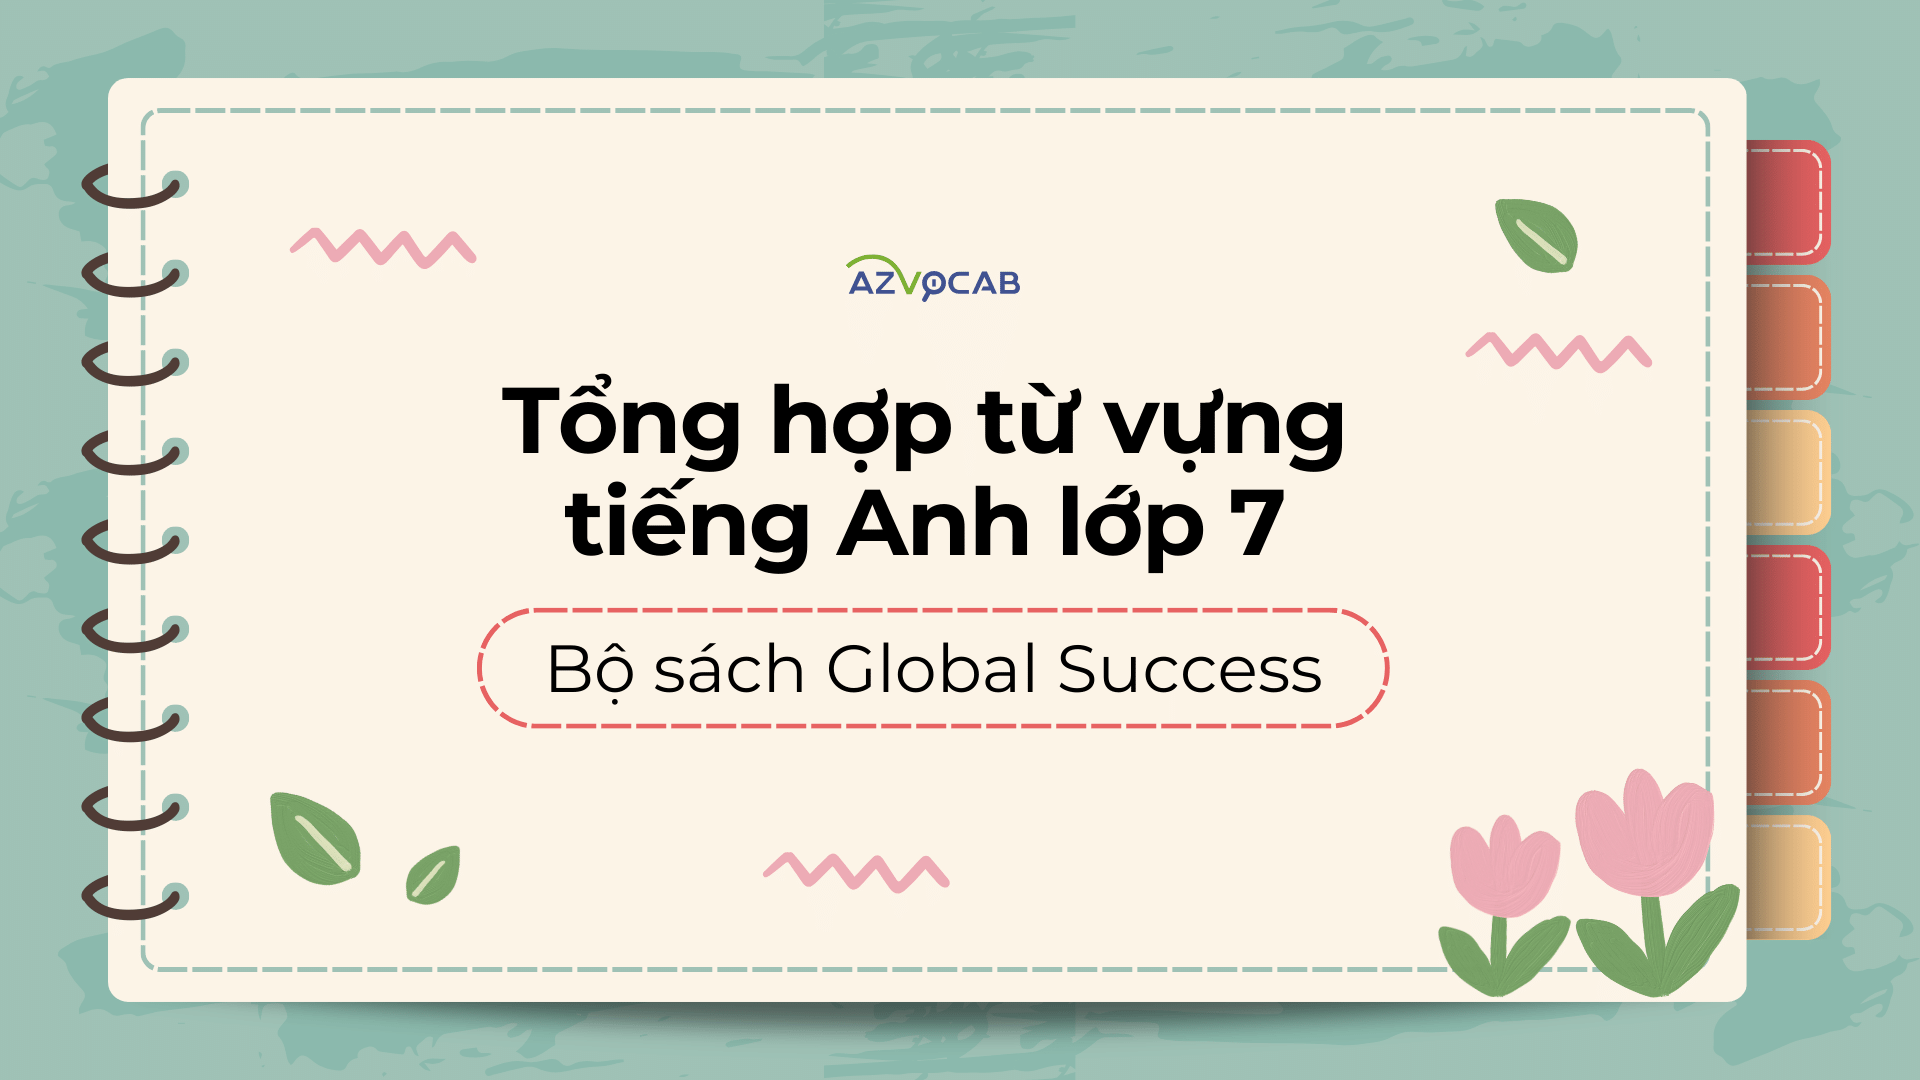 Tiếng Anh lớp 7 Global Success